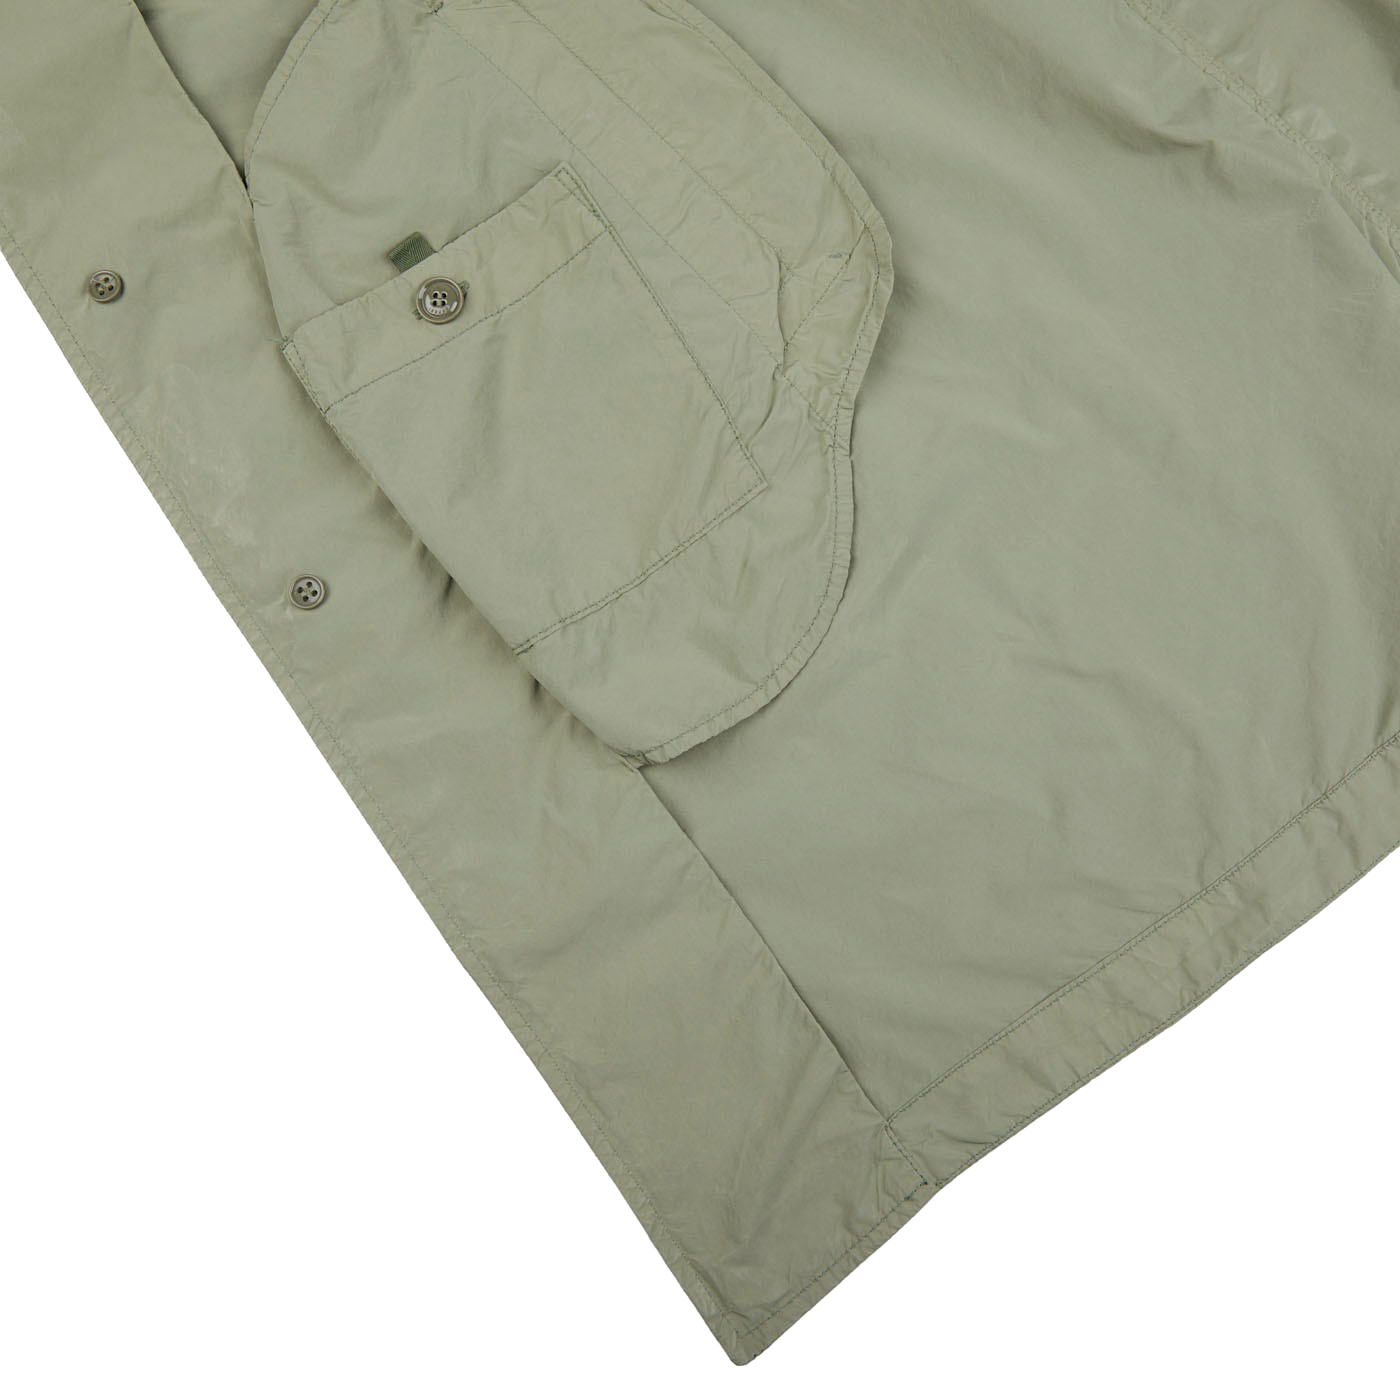 An Aspesi Sage Green Micro Nylon Limone Coat with a pocket on the front.